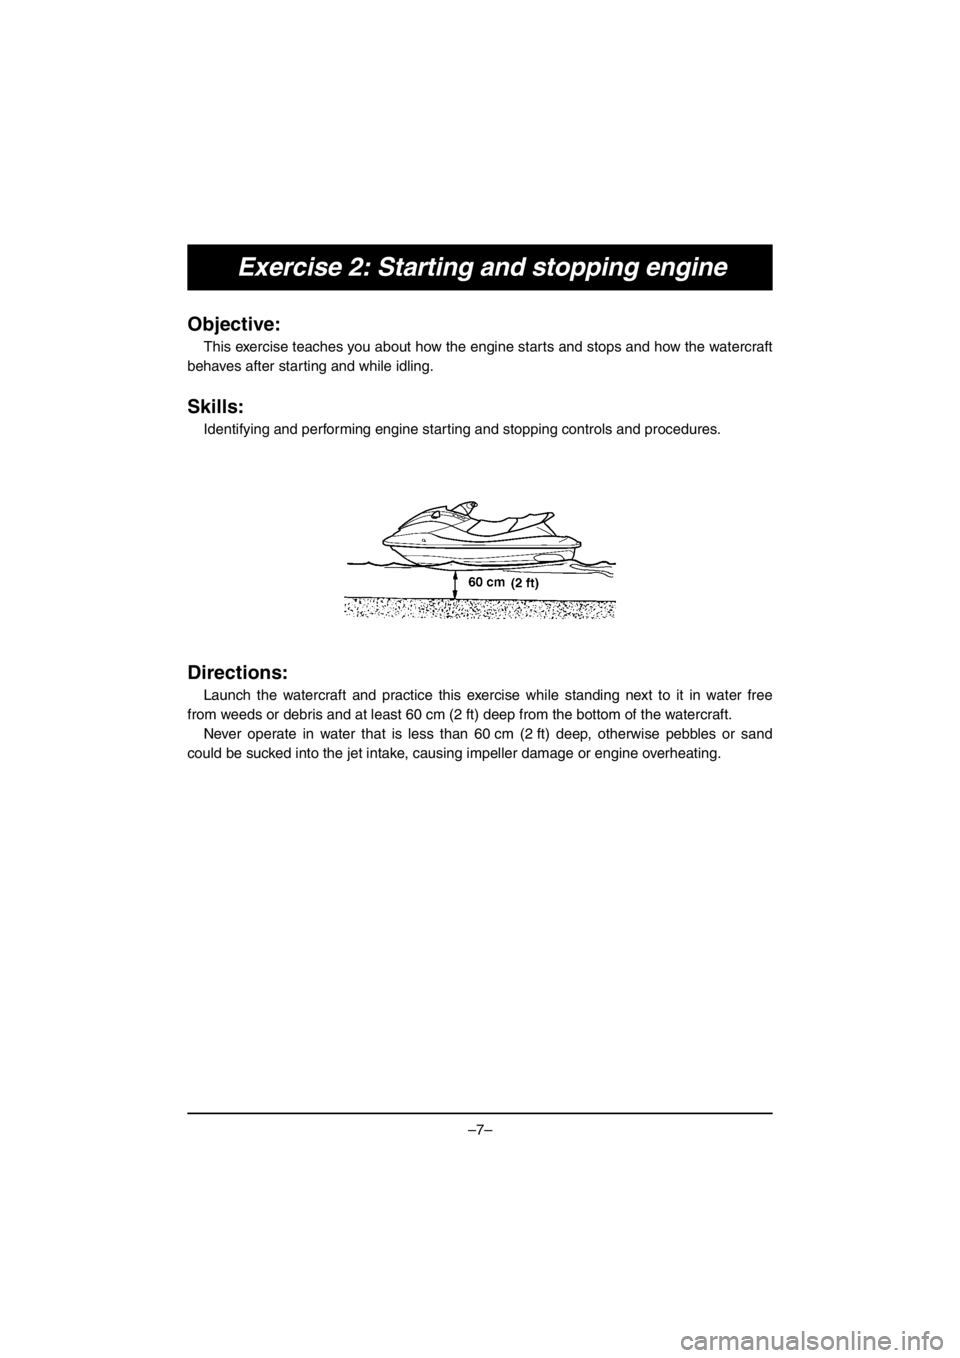 YAMAHA EX 2017  ΟΔΗΓΌΣ ΧΡΉΣΗΣ (in Greek) –7–
Exercise 2: Starting and stopping engine
Objective:
This exercise teaches you about how the engine starts and stops and how the watercraft
behaves after starting and while idling.
Skills:
Iden